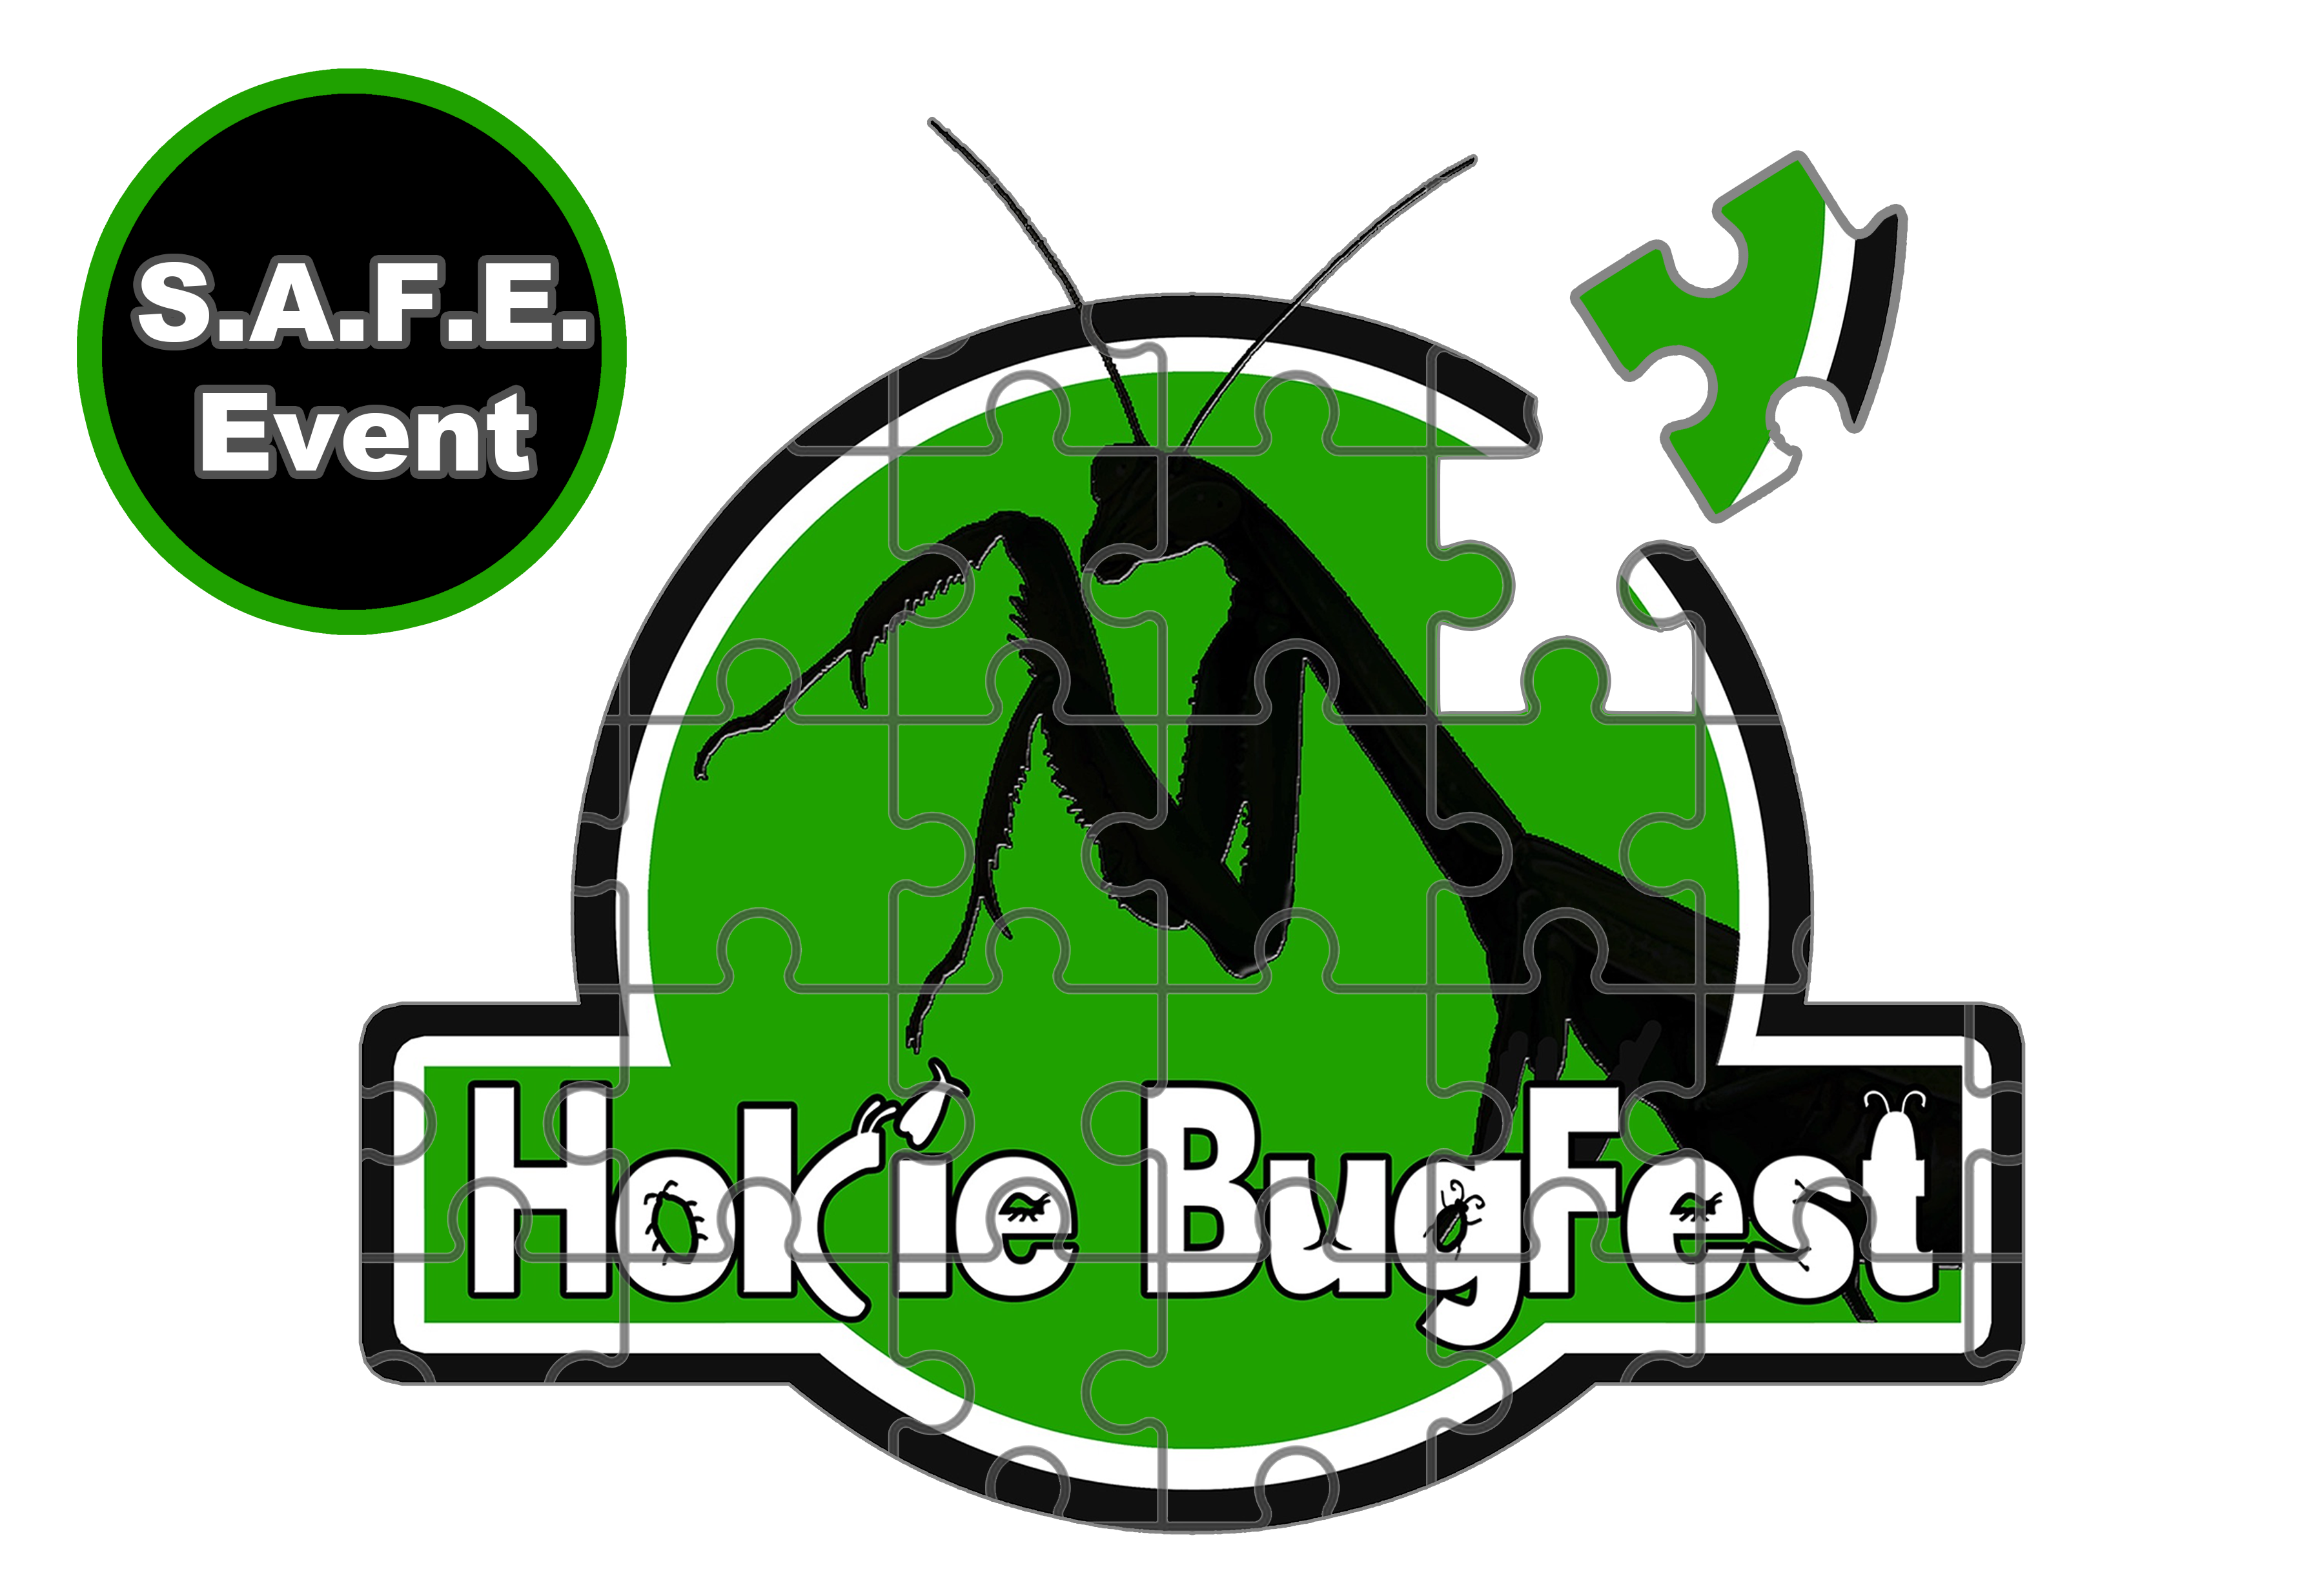 Hokie BugFest Activites at the Lyric 10 am to 5 pm